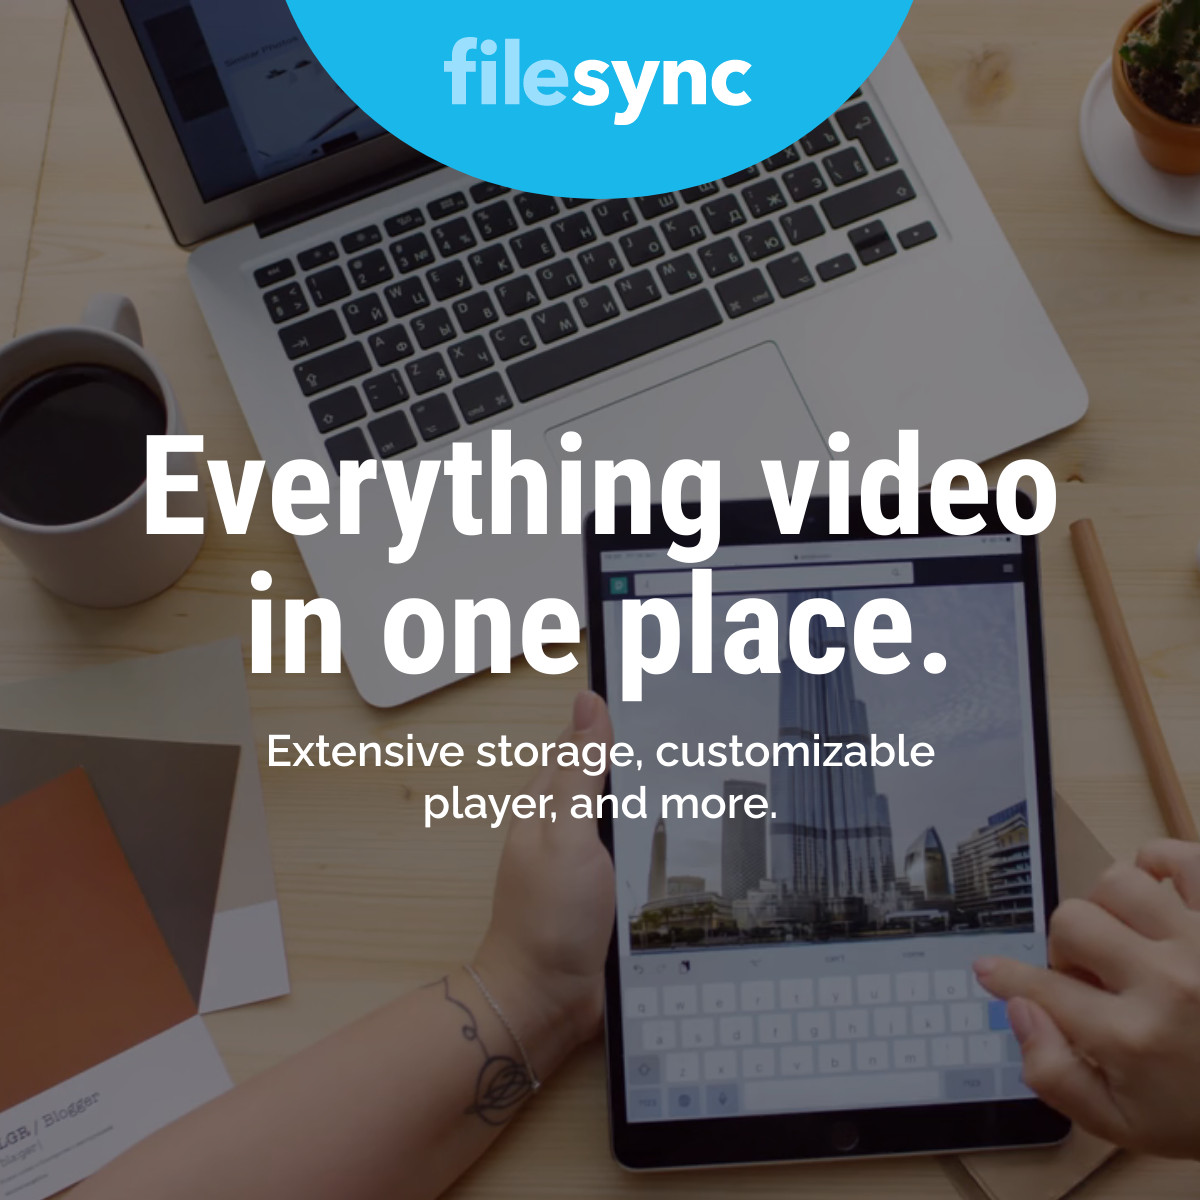 Everything Video In One Place Video Facebook Video Cover 1250x463